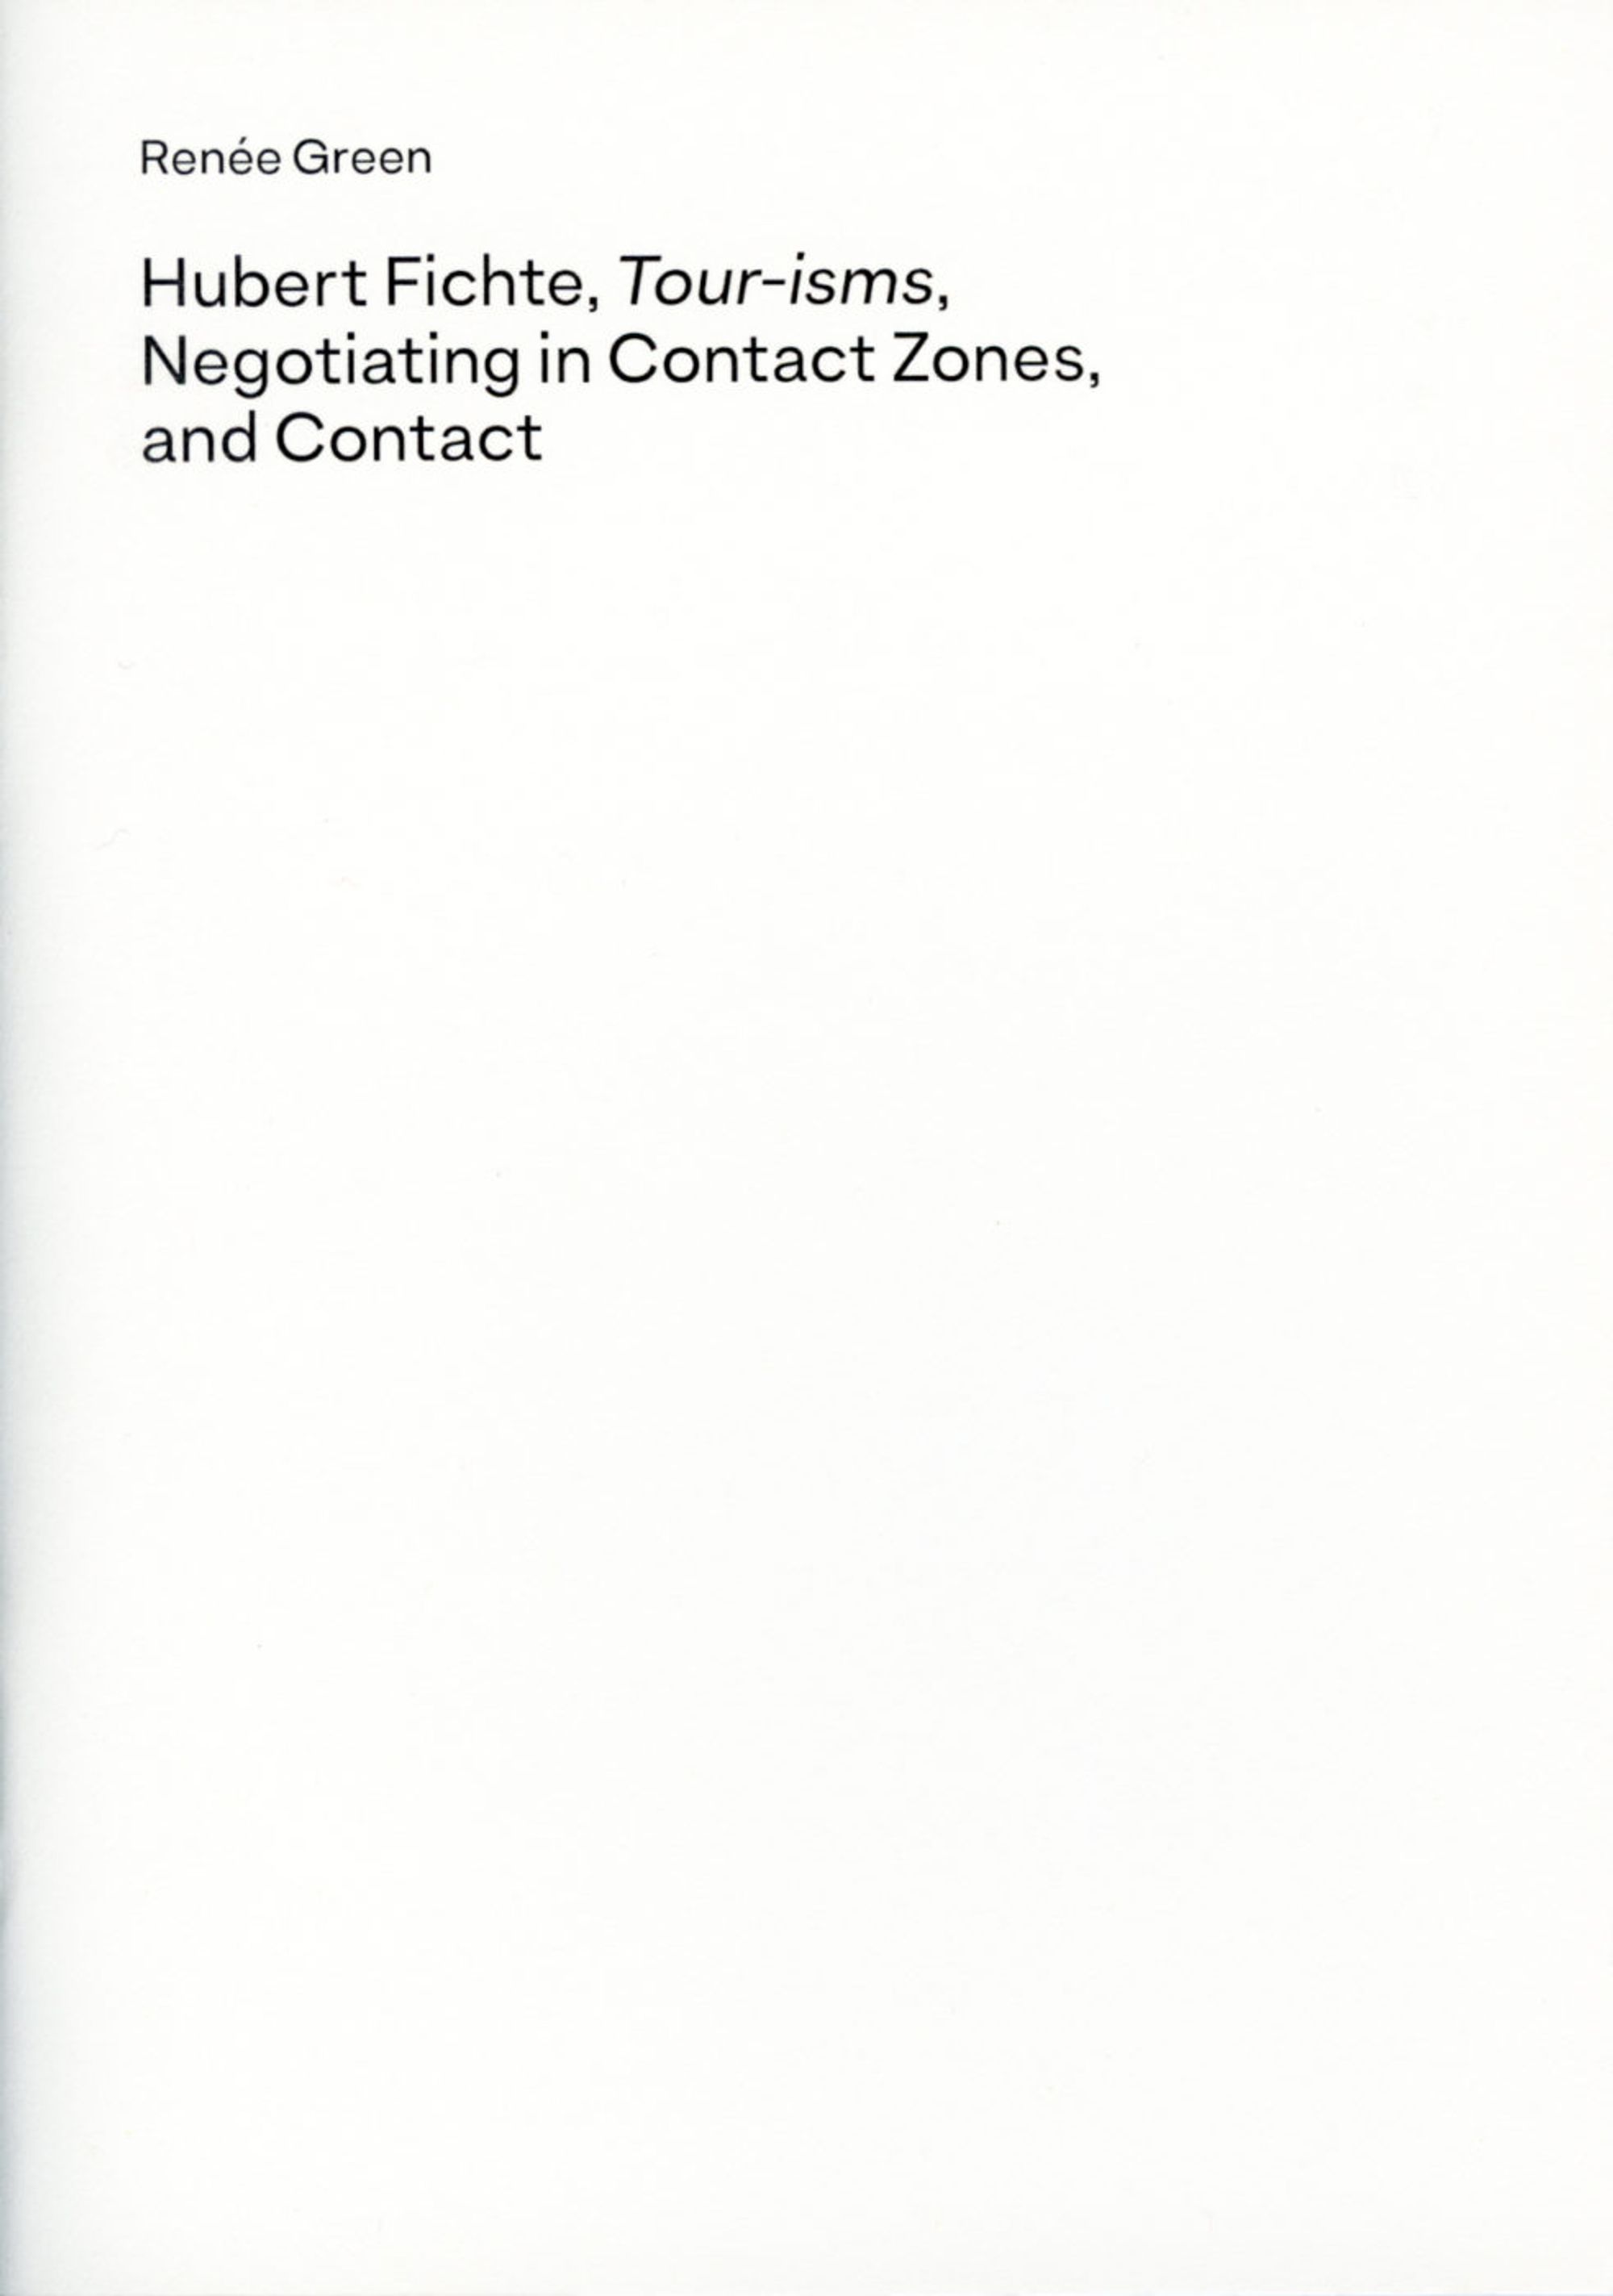 Detail view of Hubert Fichte, Tour-isms, Negotiating in Contact Zones, and Contact against a plain gray background